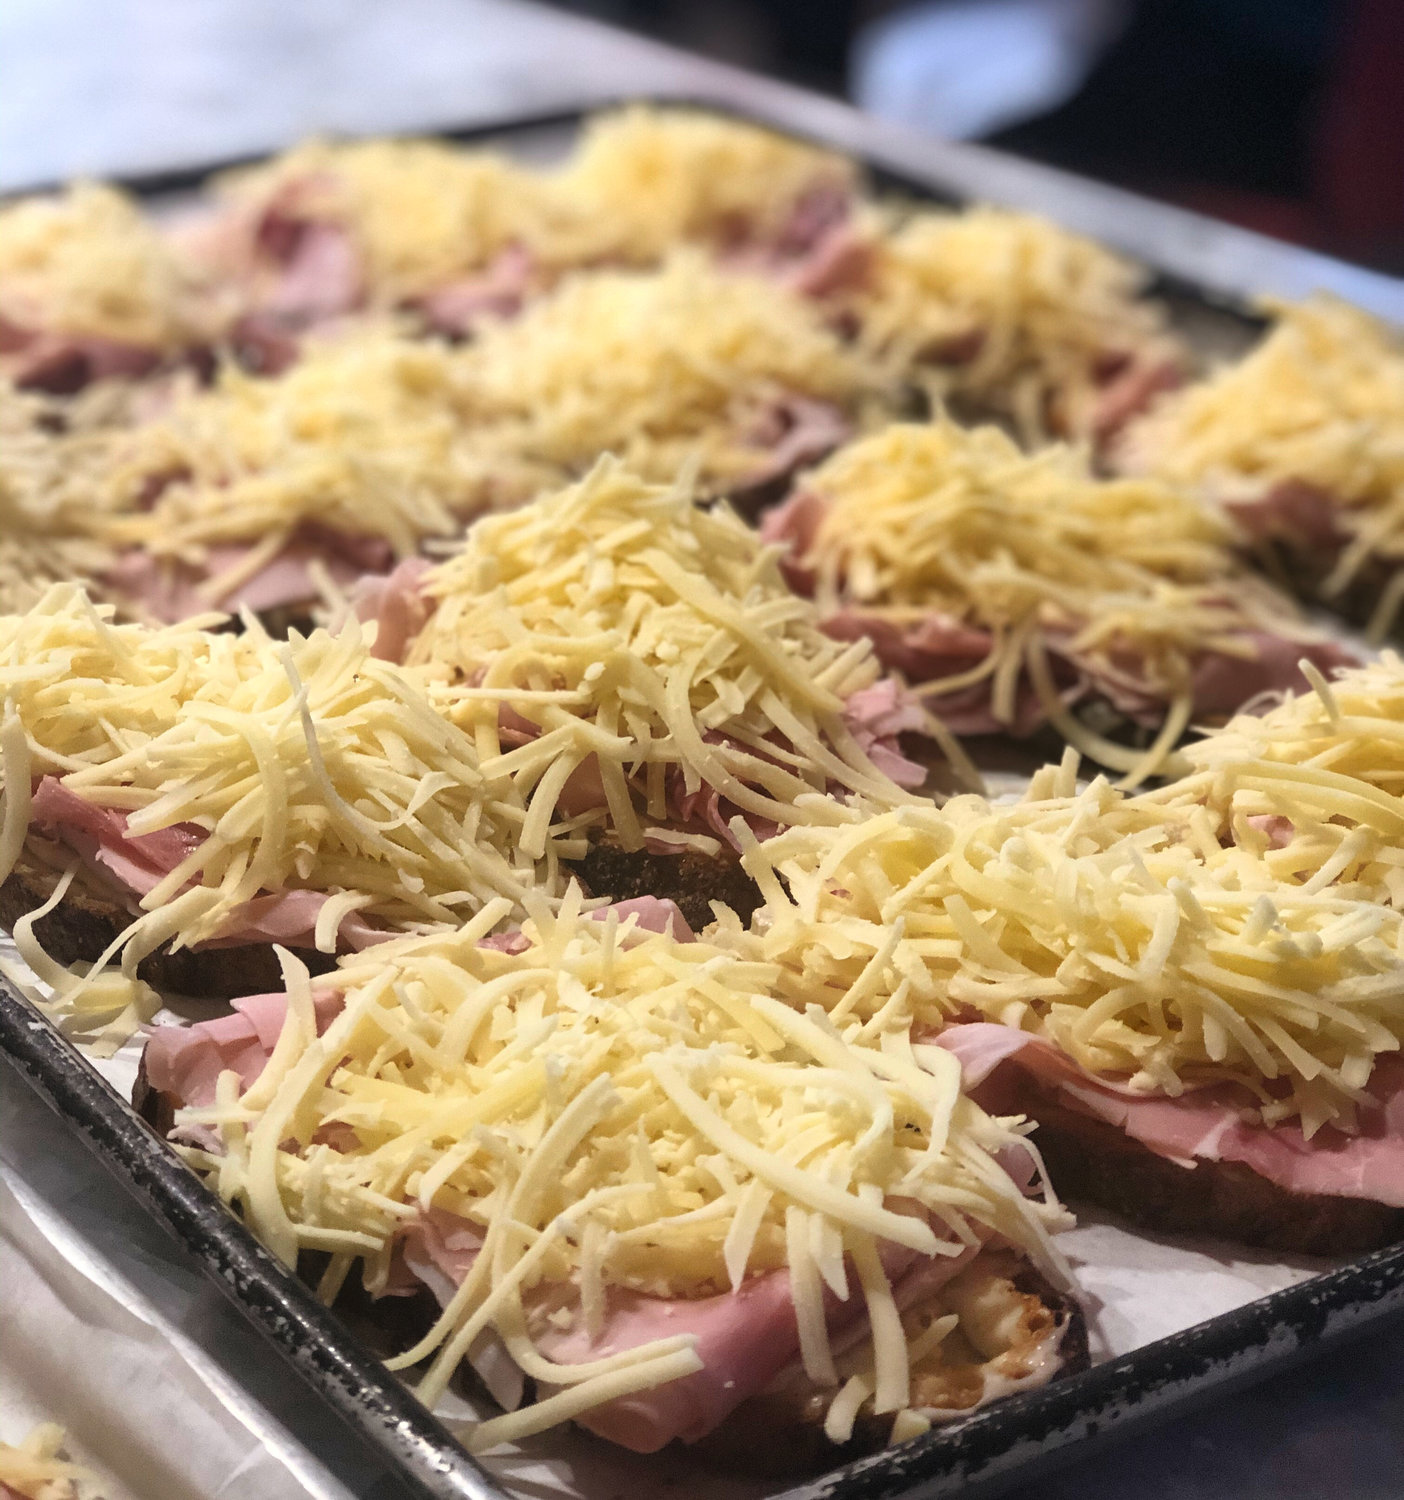 Preparing a tray of Croque Monsieurs at the Nantucket Culinary Center during the 2020 Elin Hilderbrand Bucket List Weekend.